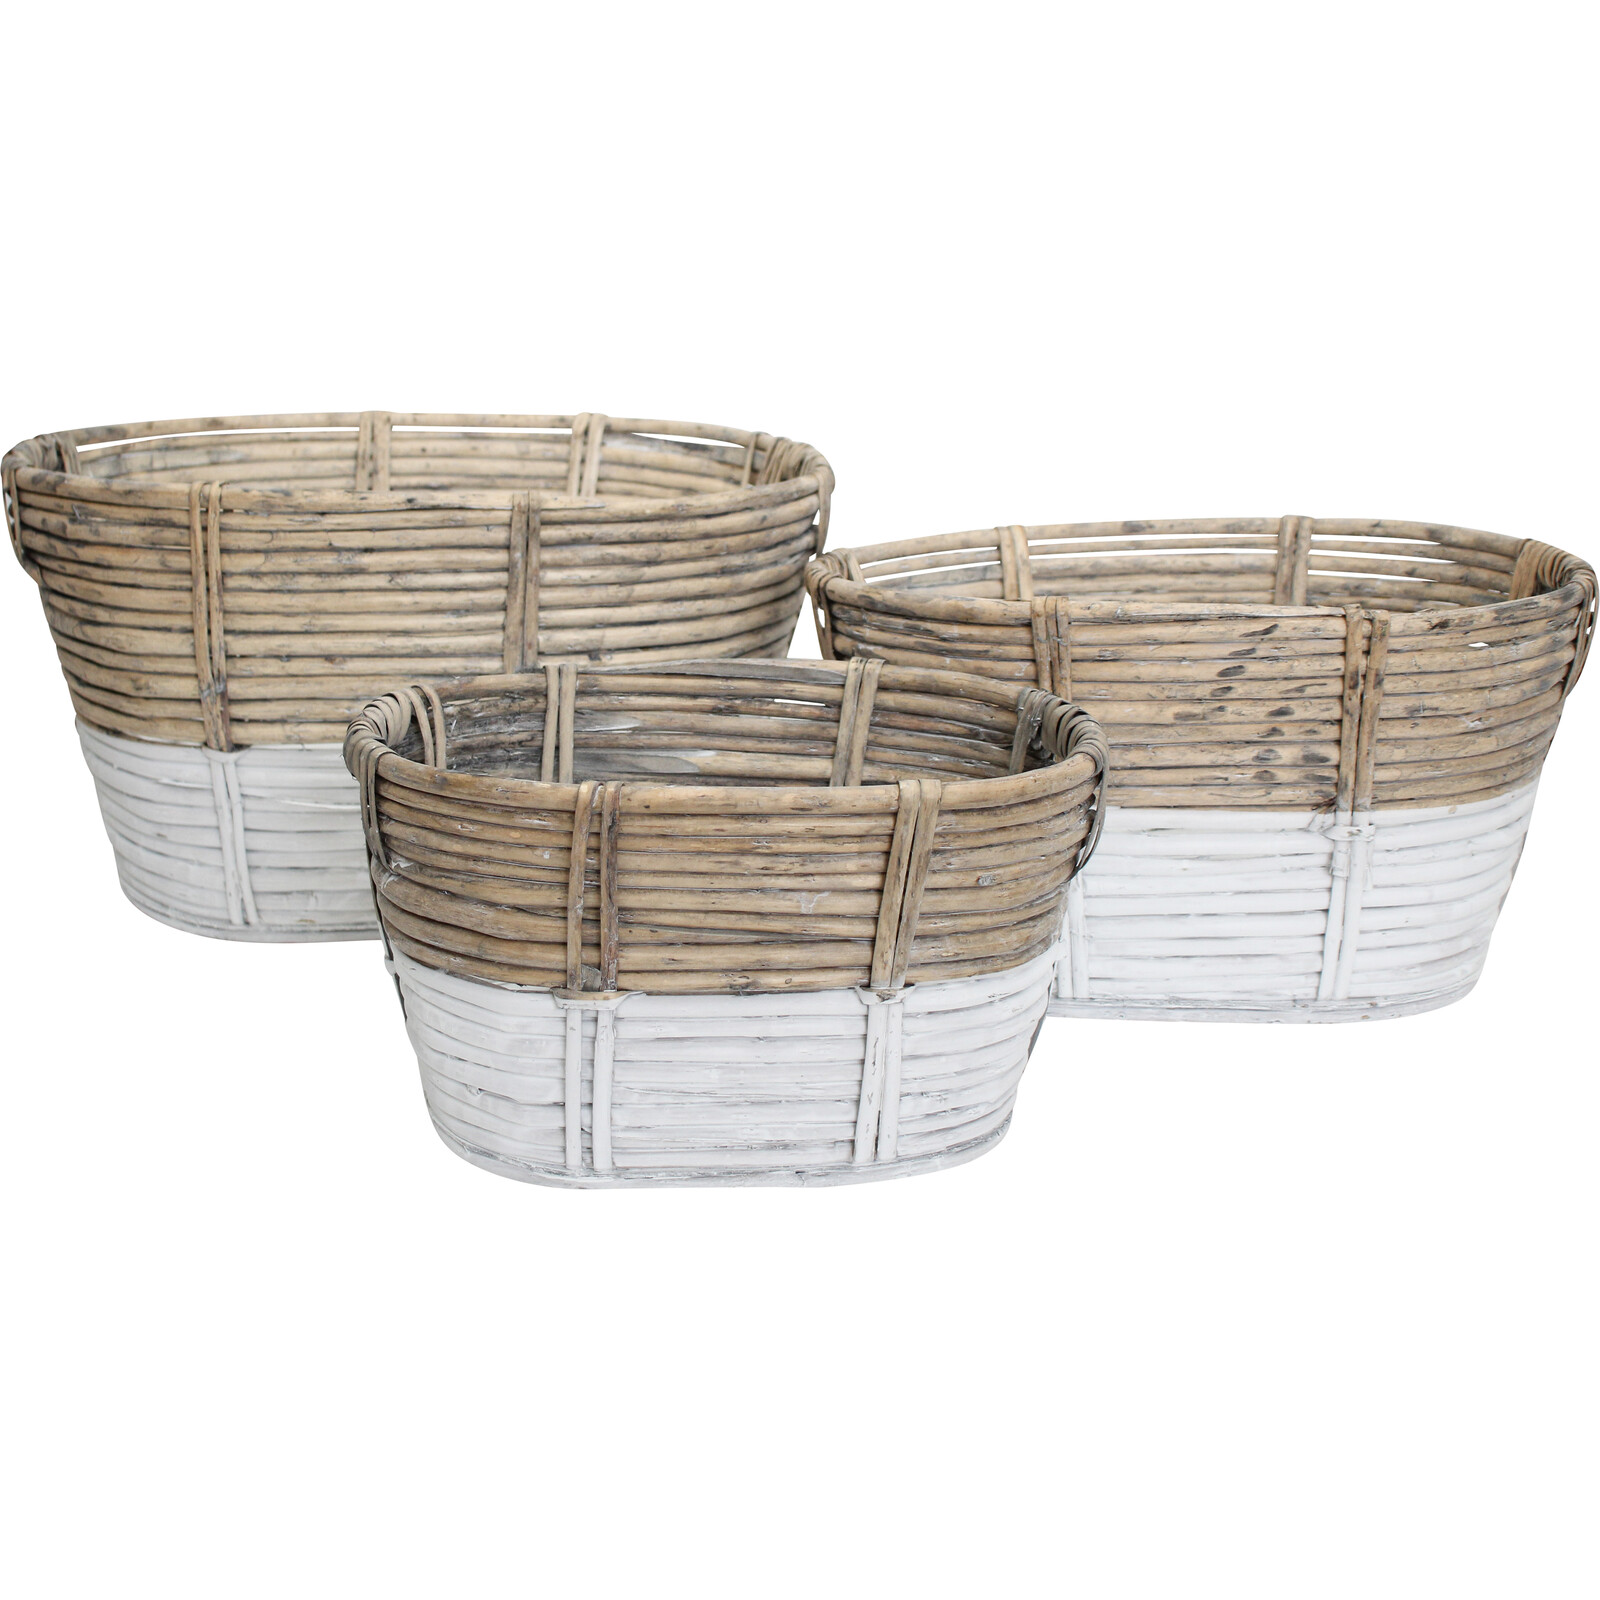 Planter S/3 Oval Willow